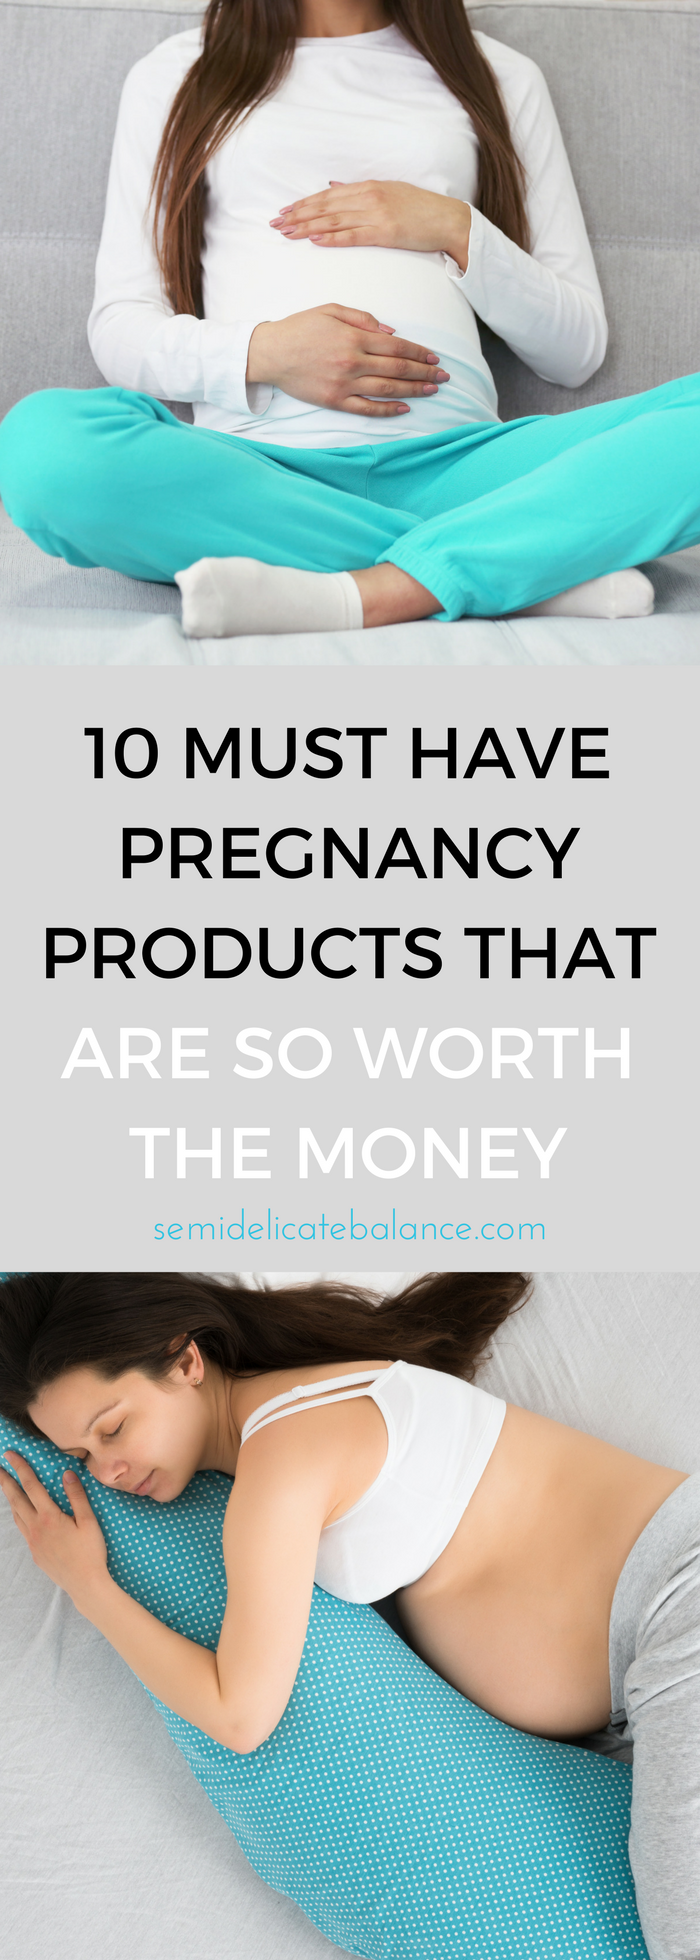 10 Must Have Pregnancy Products That Are SO Worth The Money